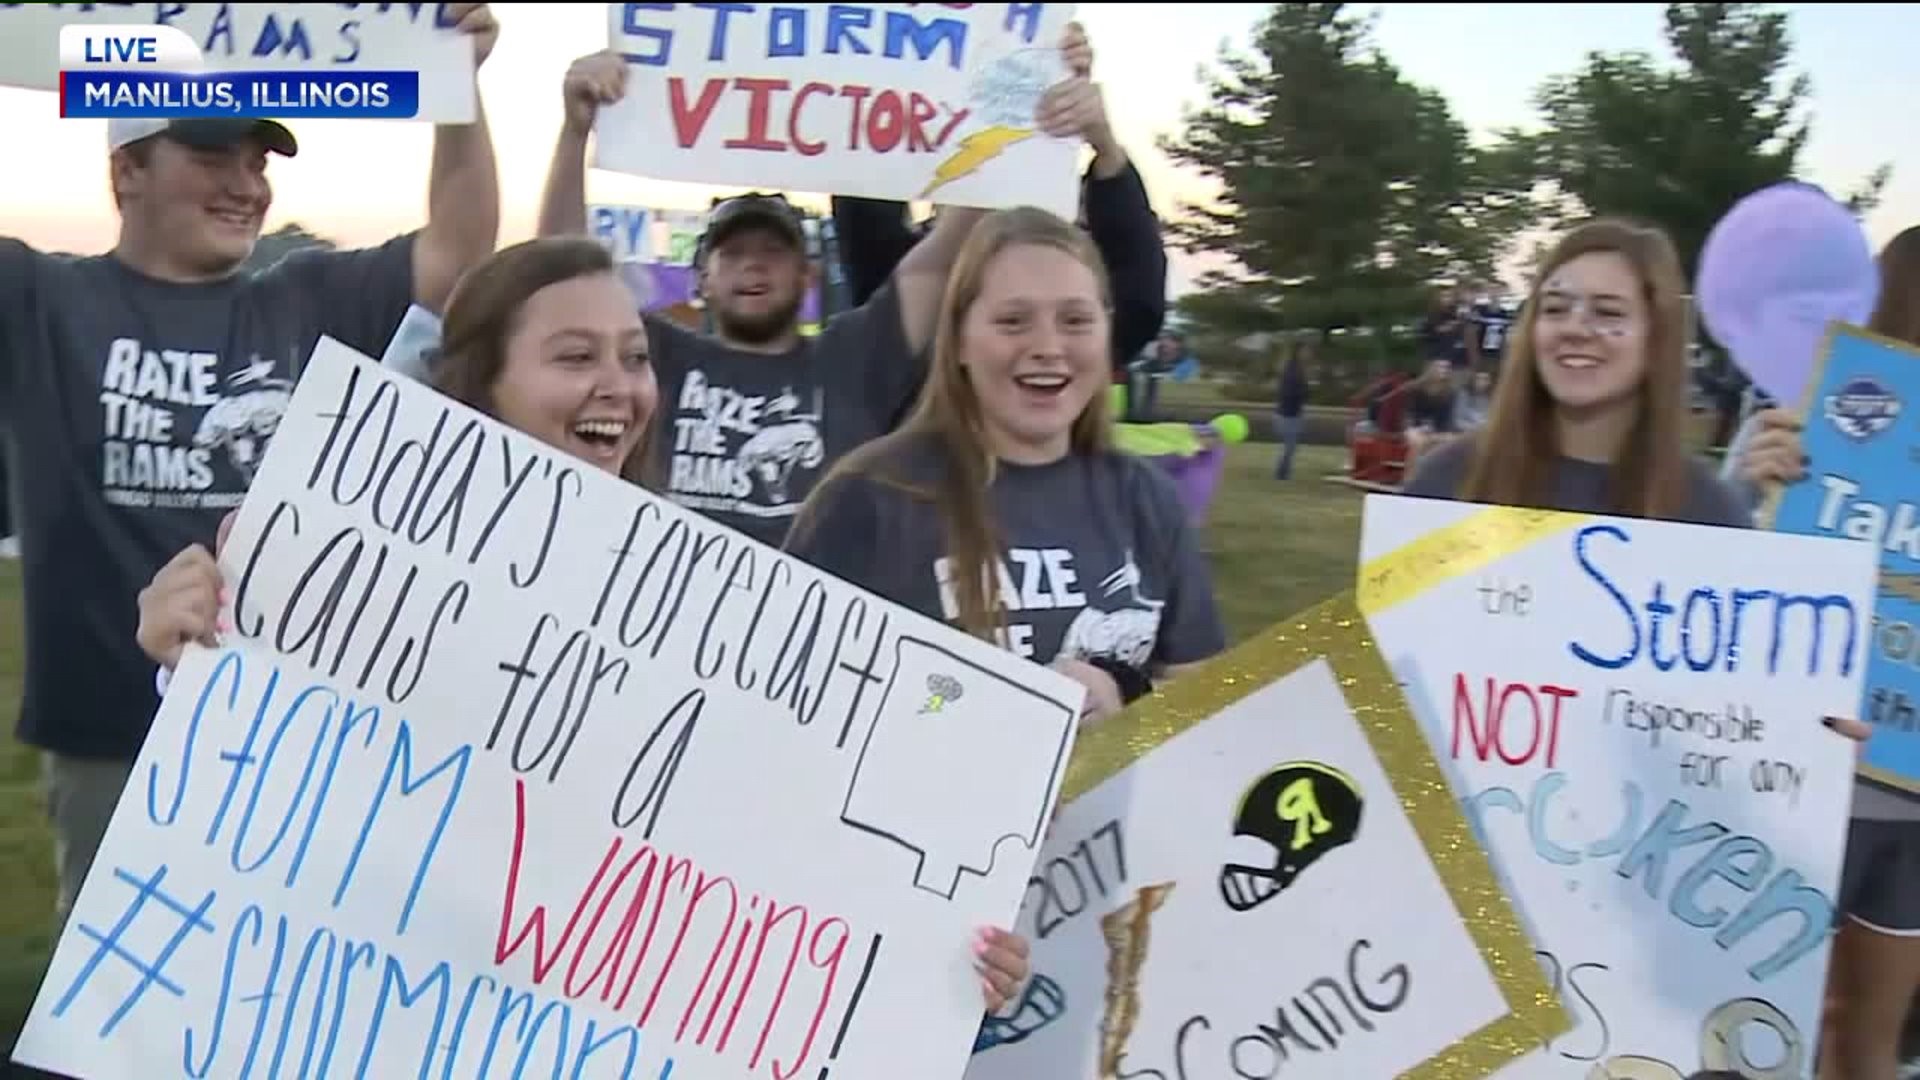 Students Win Prizes From Manlius Oil During Sign Contest